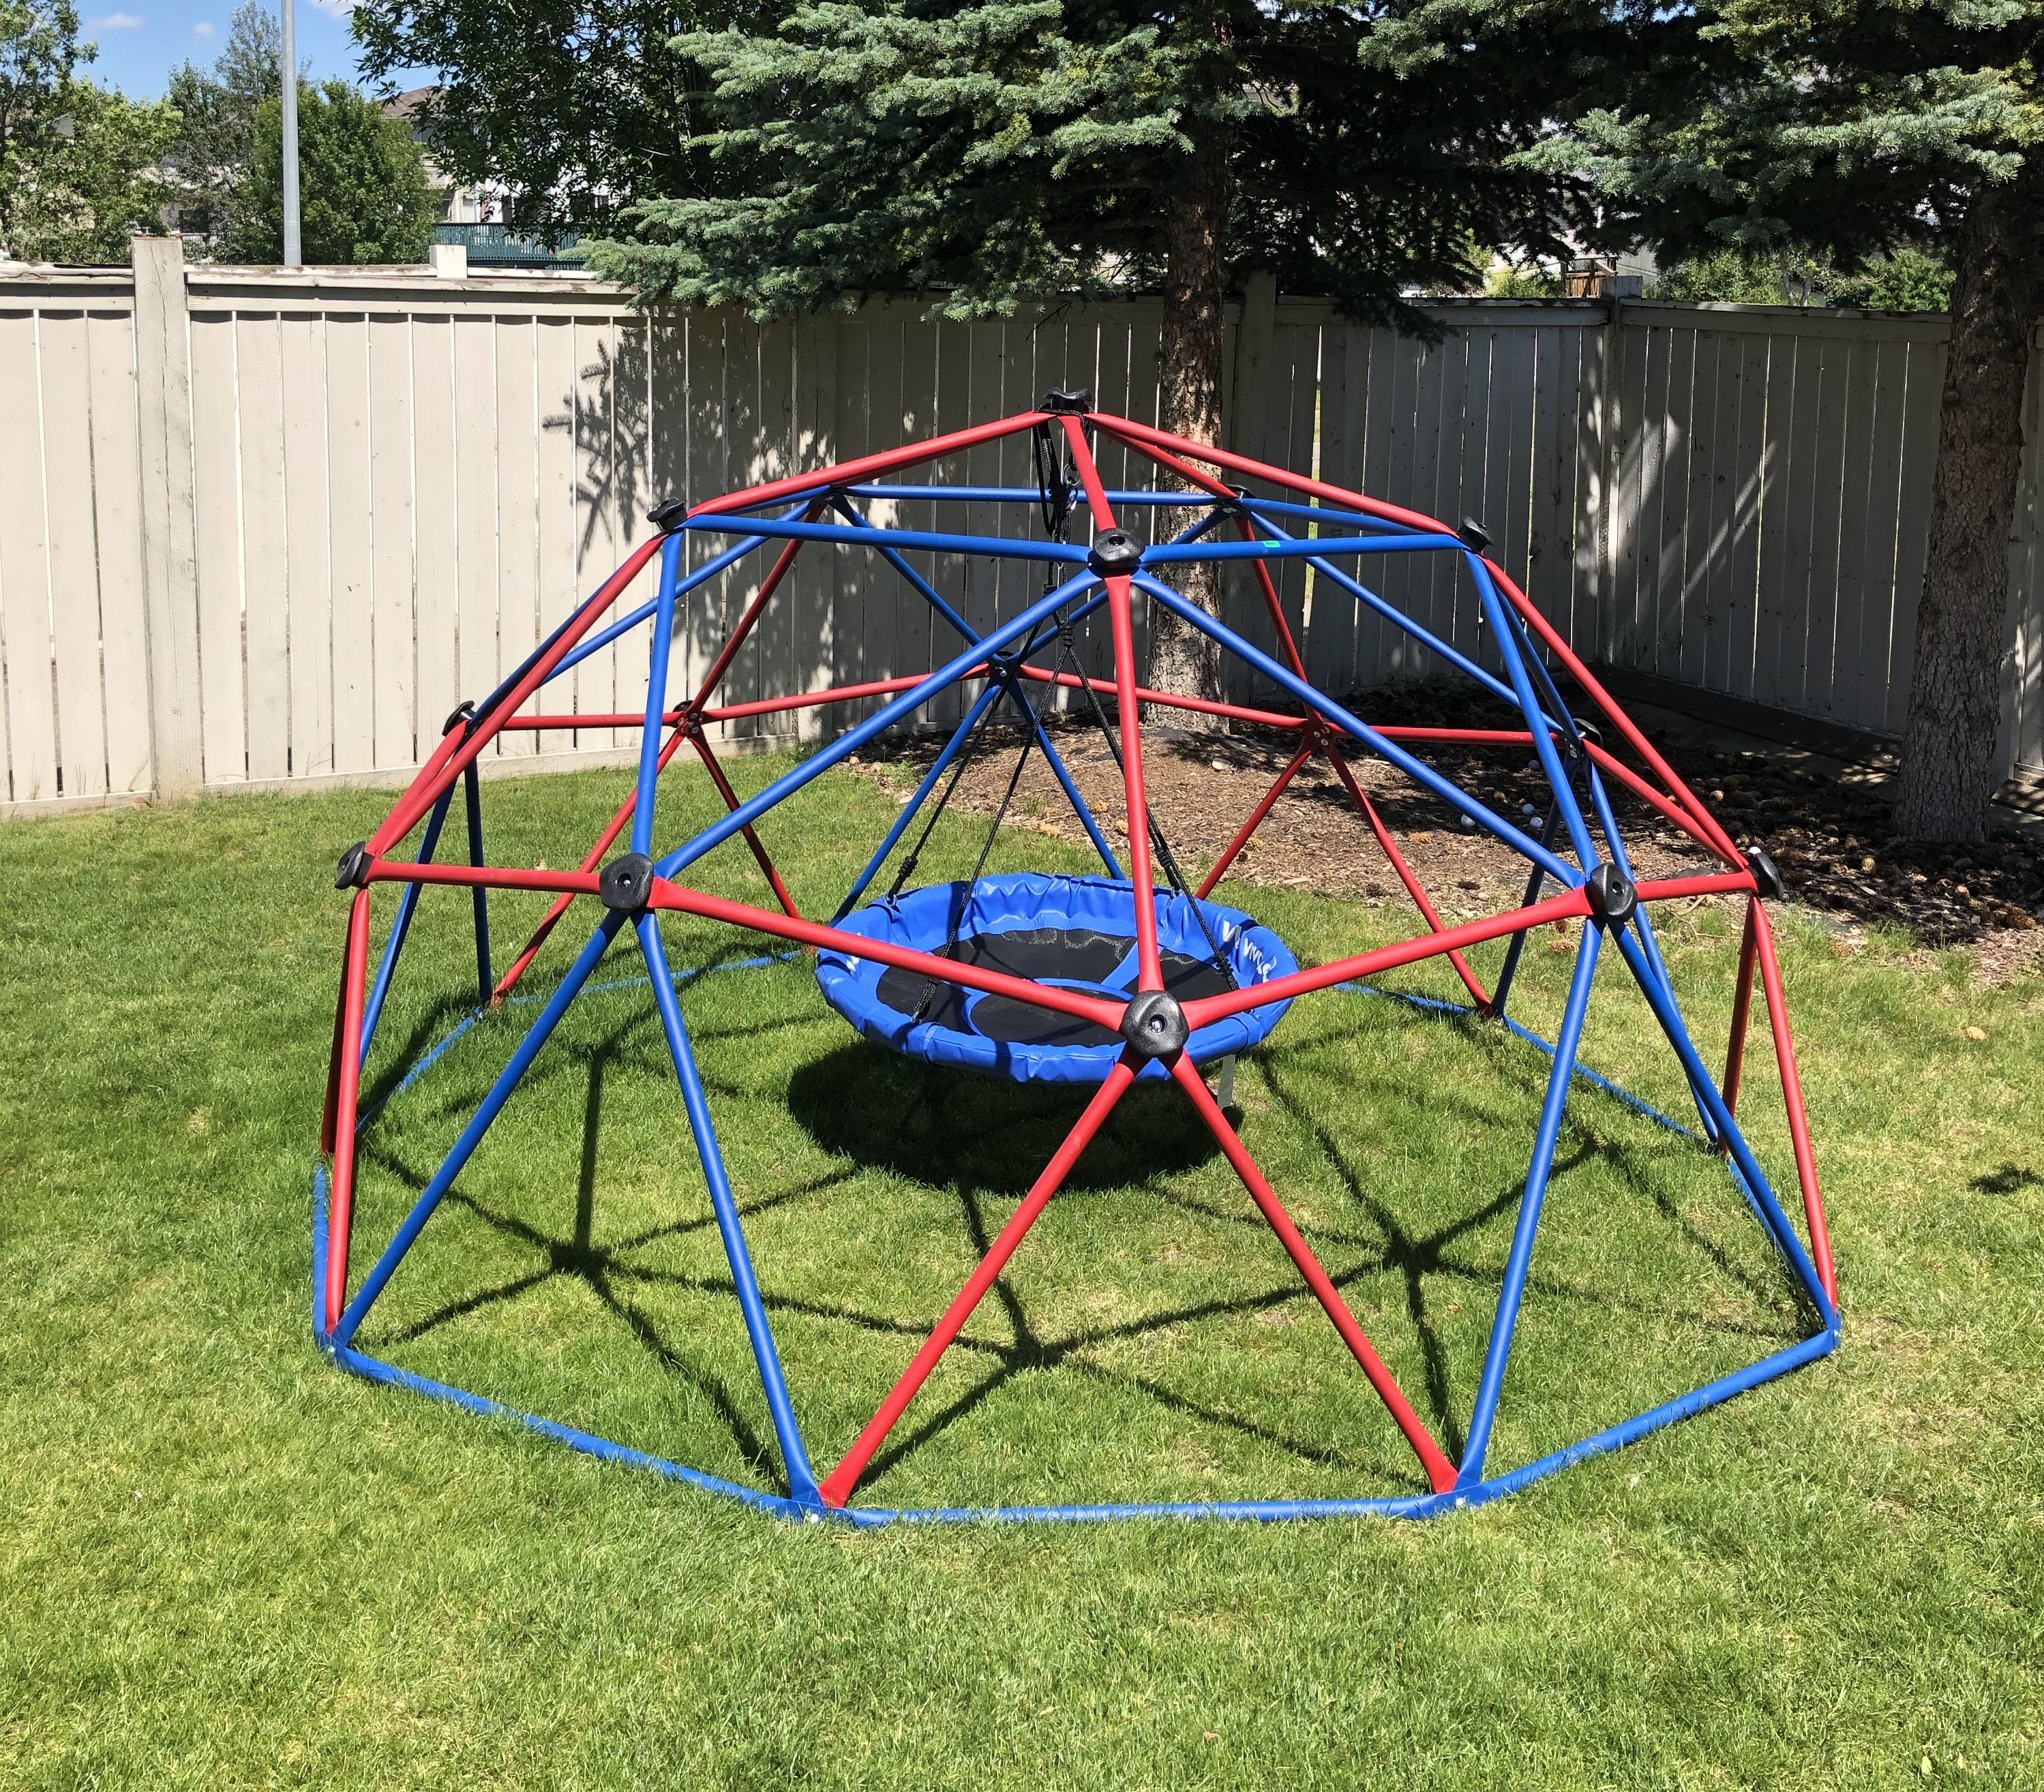 Things To Do With Your Kids: Outdoor Play With A Geometric Climbing Dome